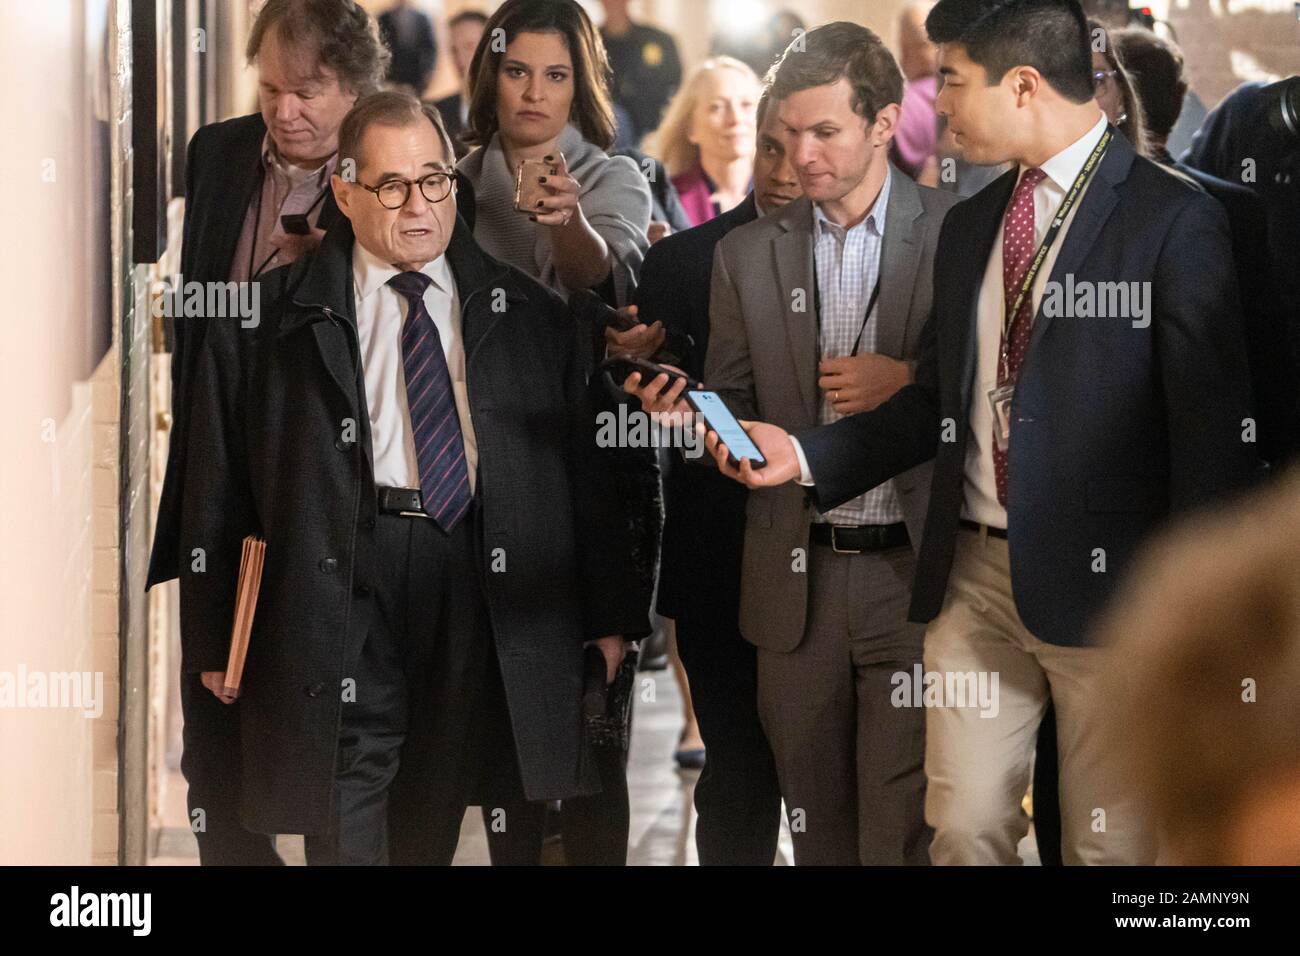 Washington, United States. 14th Jan, 2020. House Judiciary Committee Chairman Jerrold Nadler (D-NY) walks to a Democratic closed caucus meeting to meet with Speaker of the United States House of Representatives Nancy Pelosi (D-CA) and others on Capitol Hill in Washington, DC on Tuesday, January 14, 2020. Photo by Ken Cedeno/UPI. Credit: UPI/Alamy Live News Stock Photo